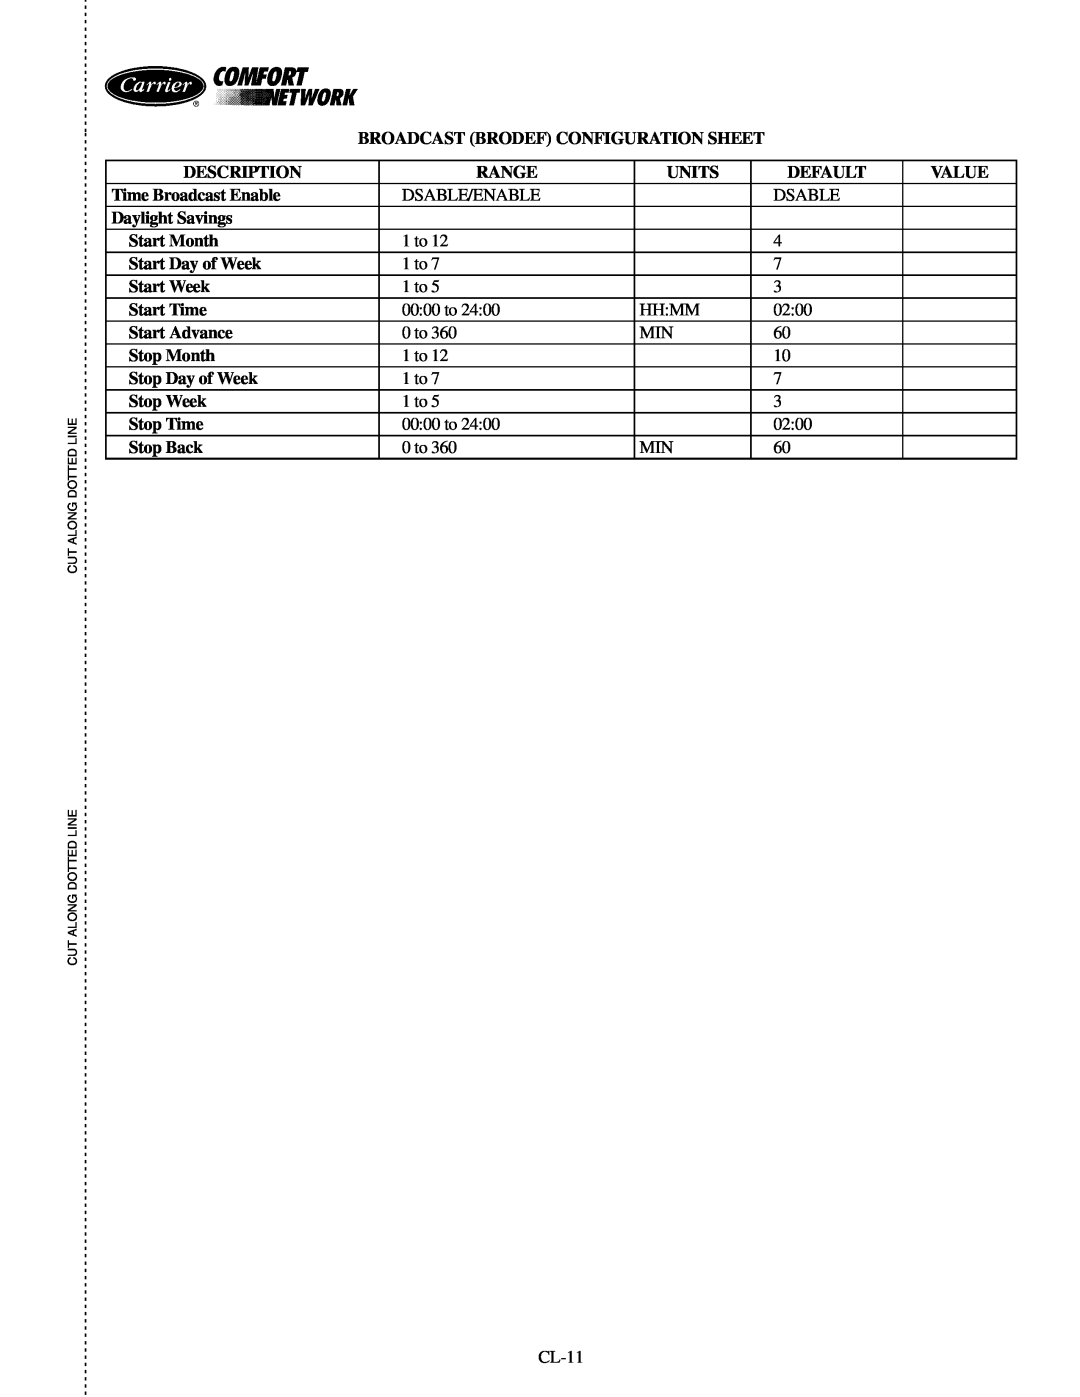 Carrier XRV, 19XR specifications Broadcast Brodef Configuration Sheet 